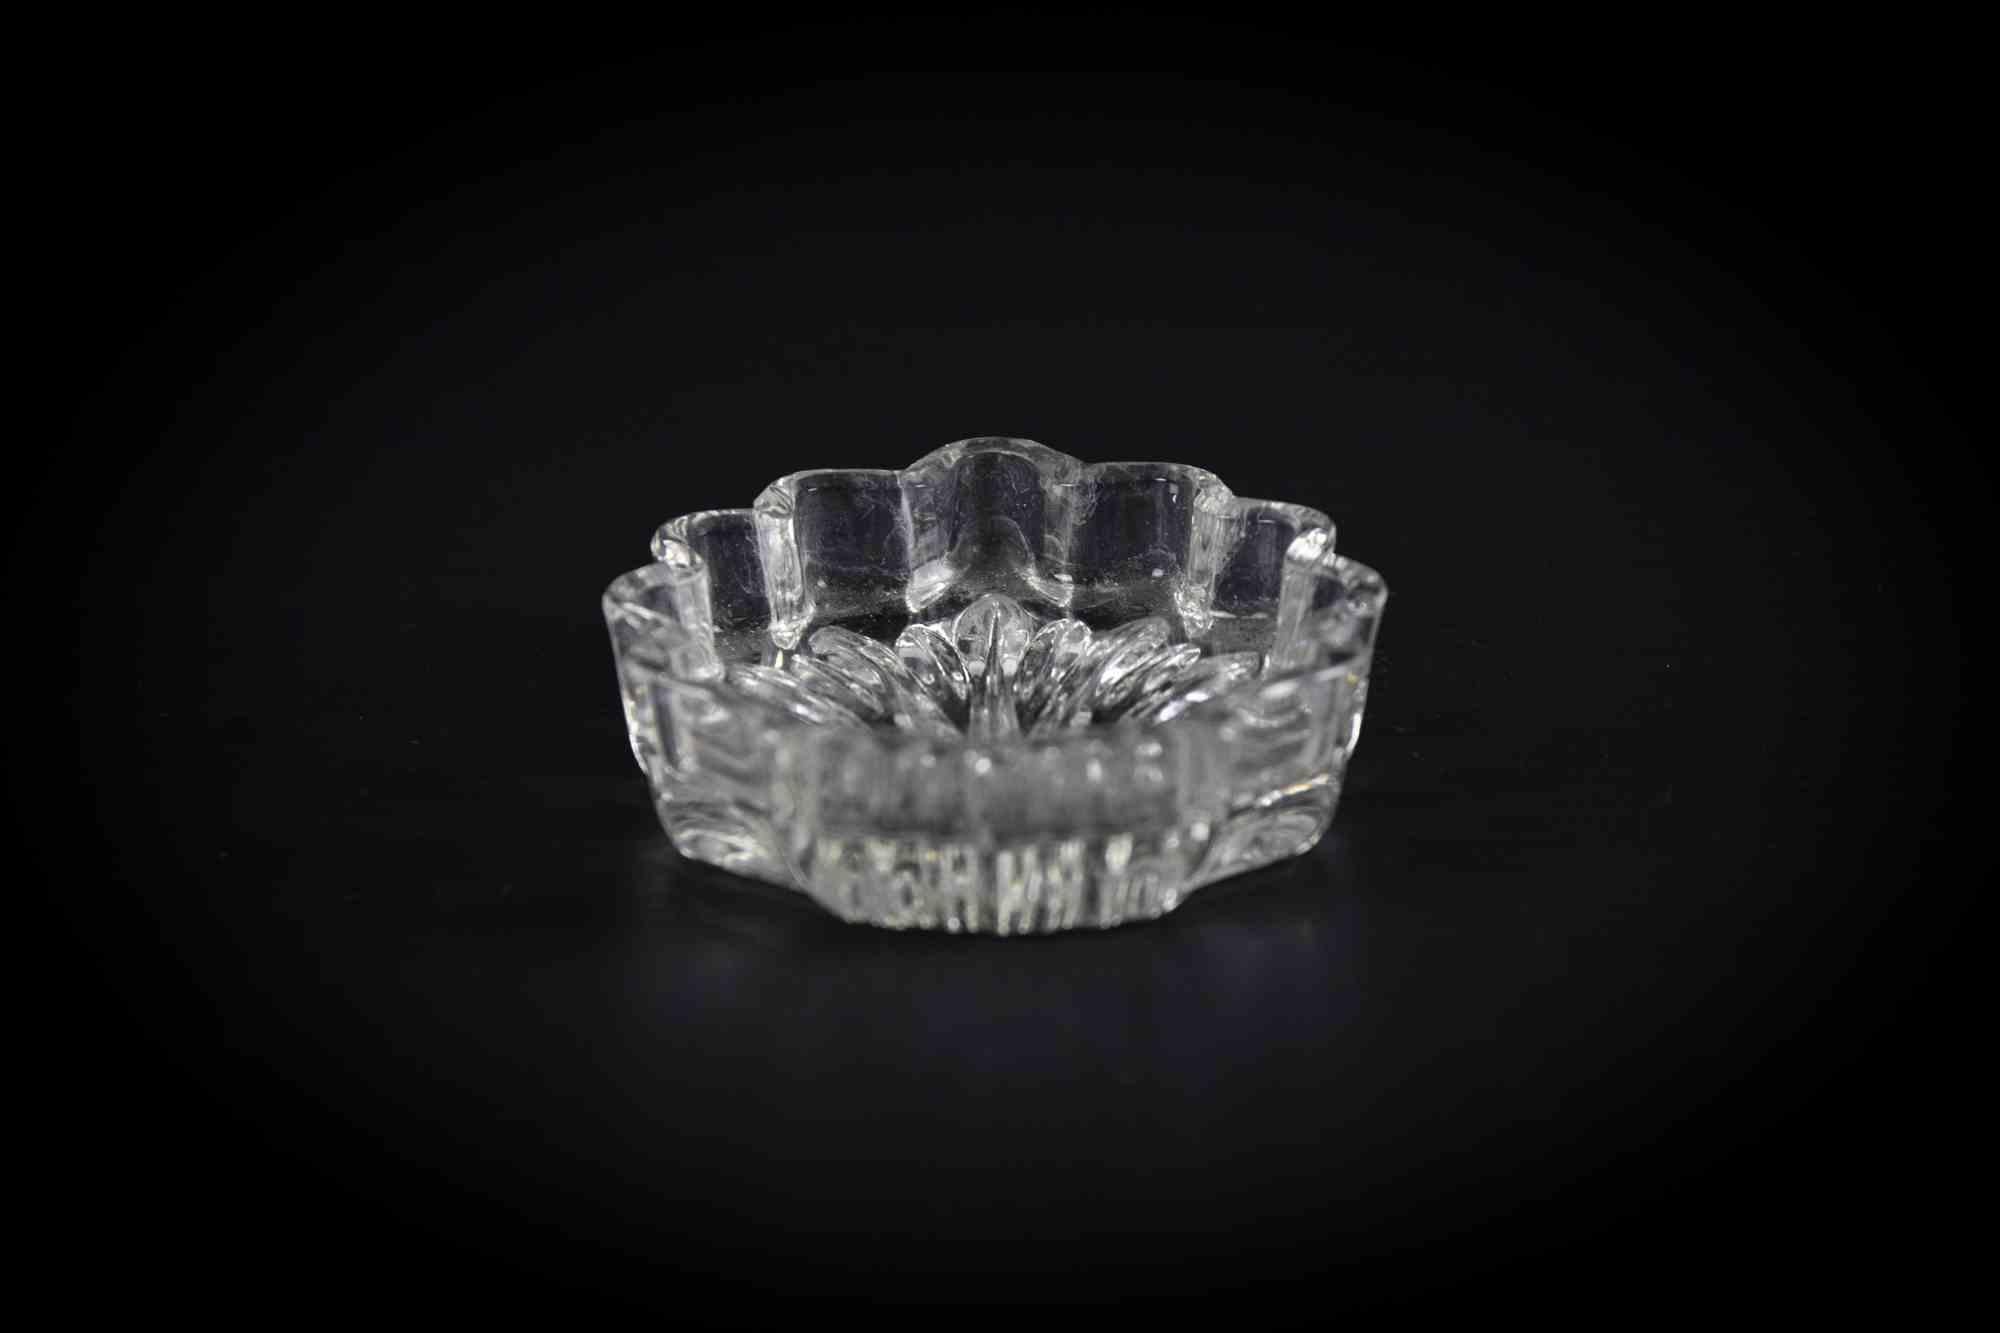 Shell shape vintage ashtray is an original decorative object realized in the mid-20th century.

Original art glass.

Made in Italy.

Dimensions: 10 x 8 cm. 

Perfect conditions.